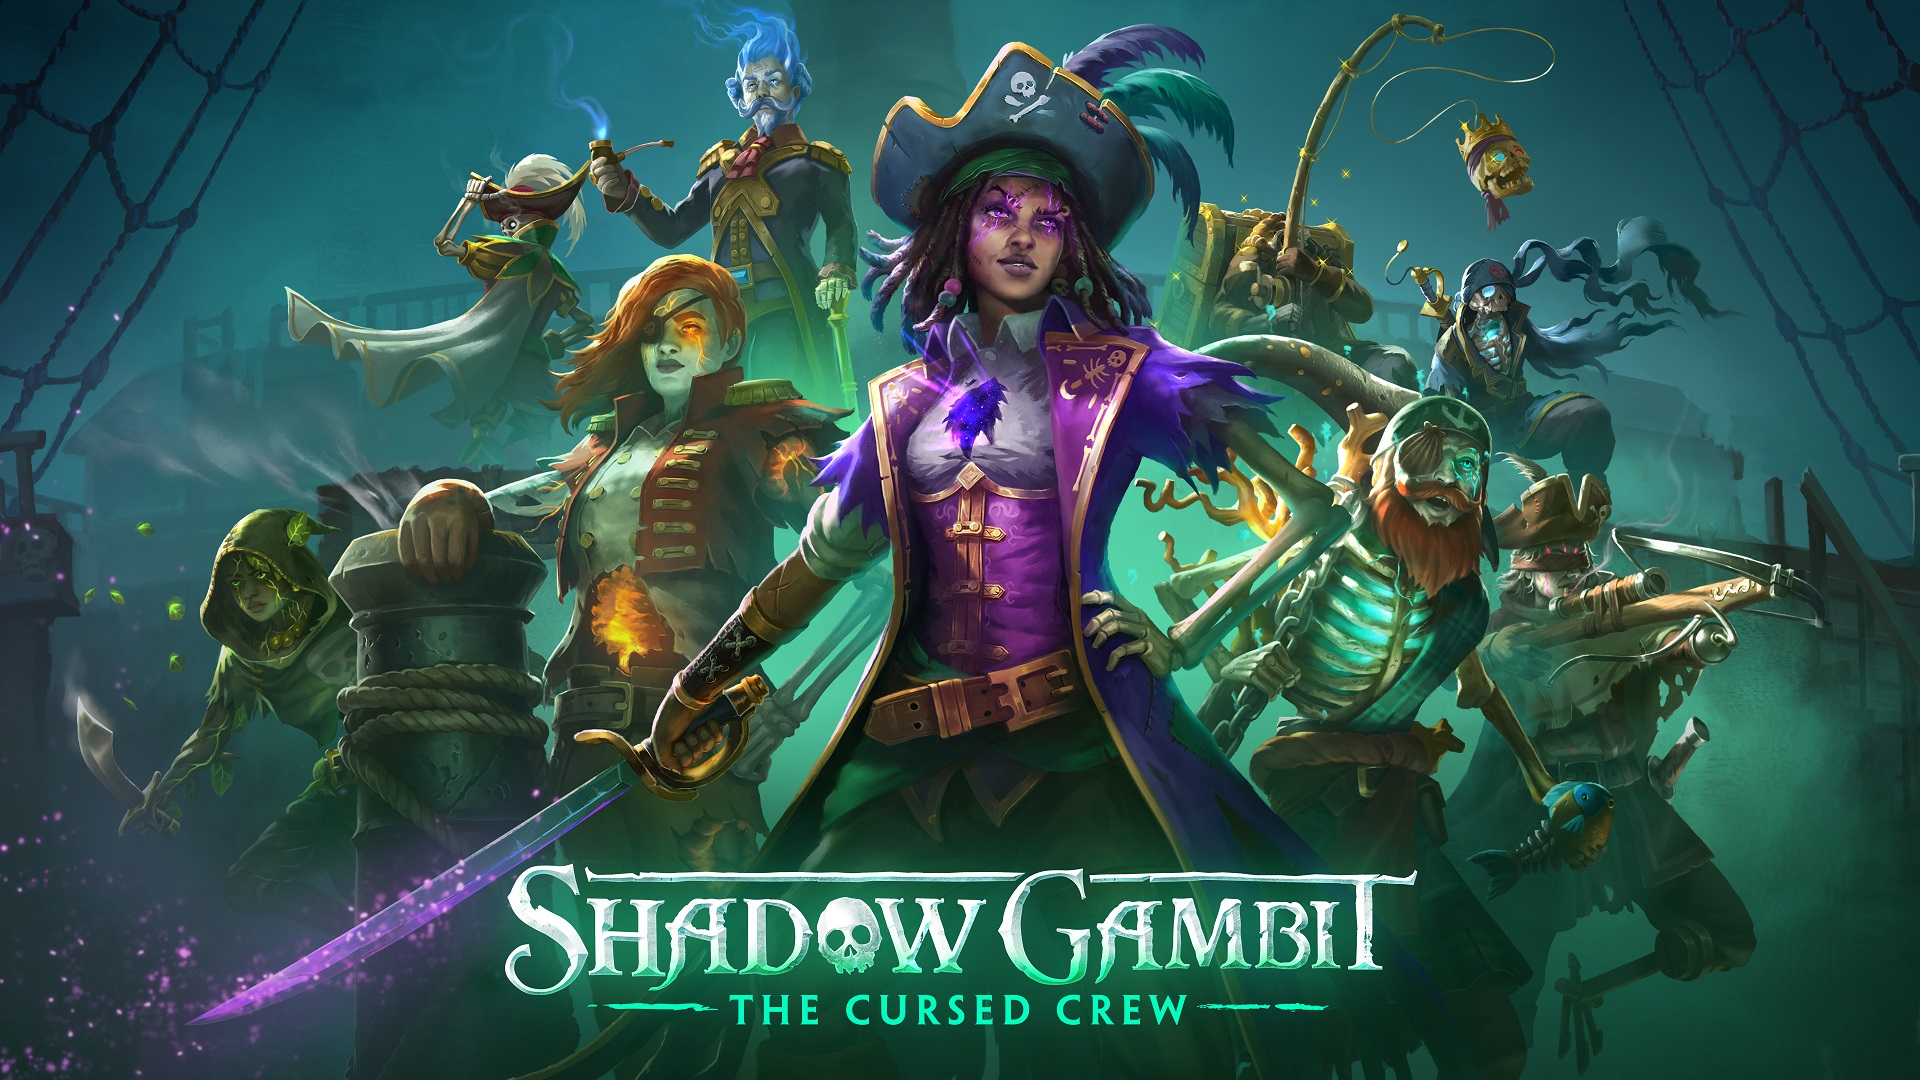 Lead a crew of ghostly pirates in Shadow Gambit, out now